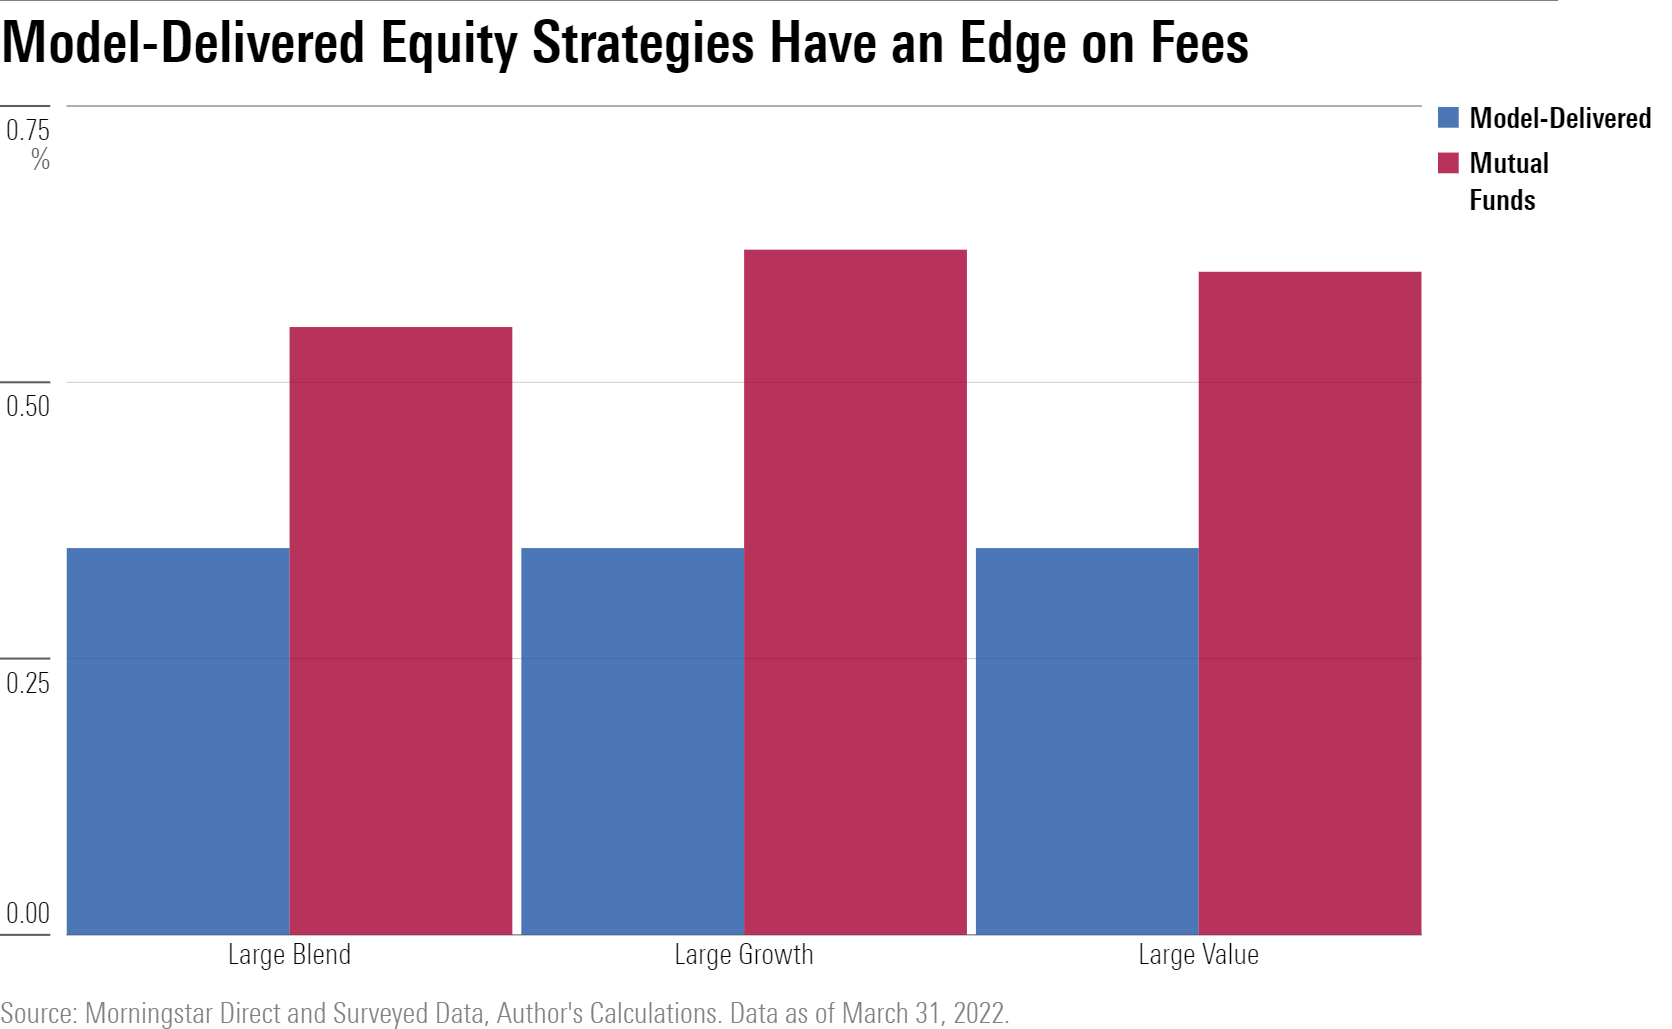 A bar chart illustrating the fee advantage that model-delivered large-cap equity strategies have over equity mutual funds.